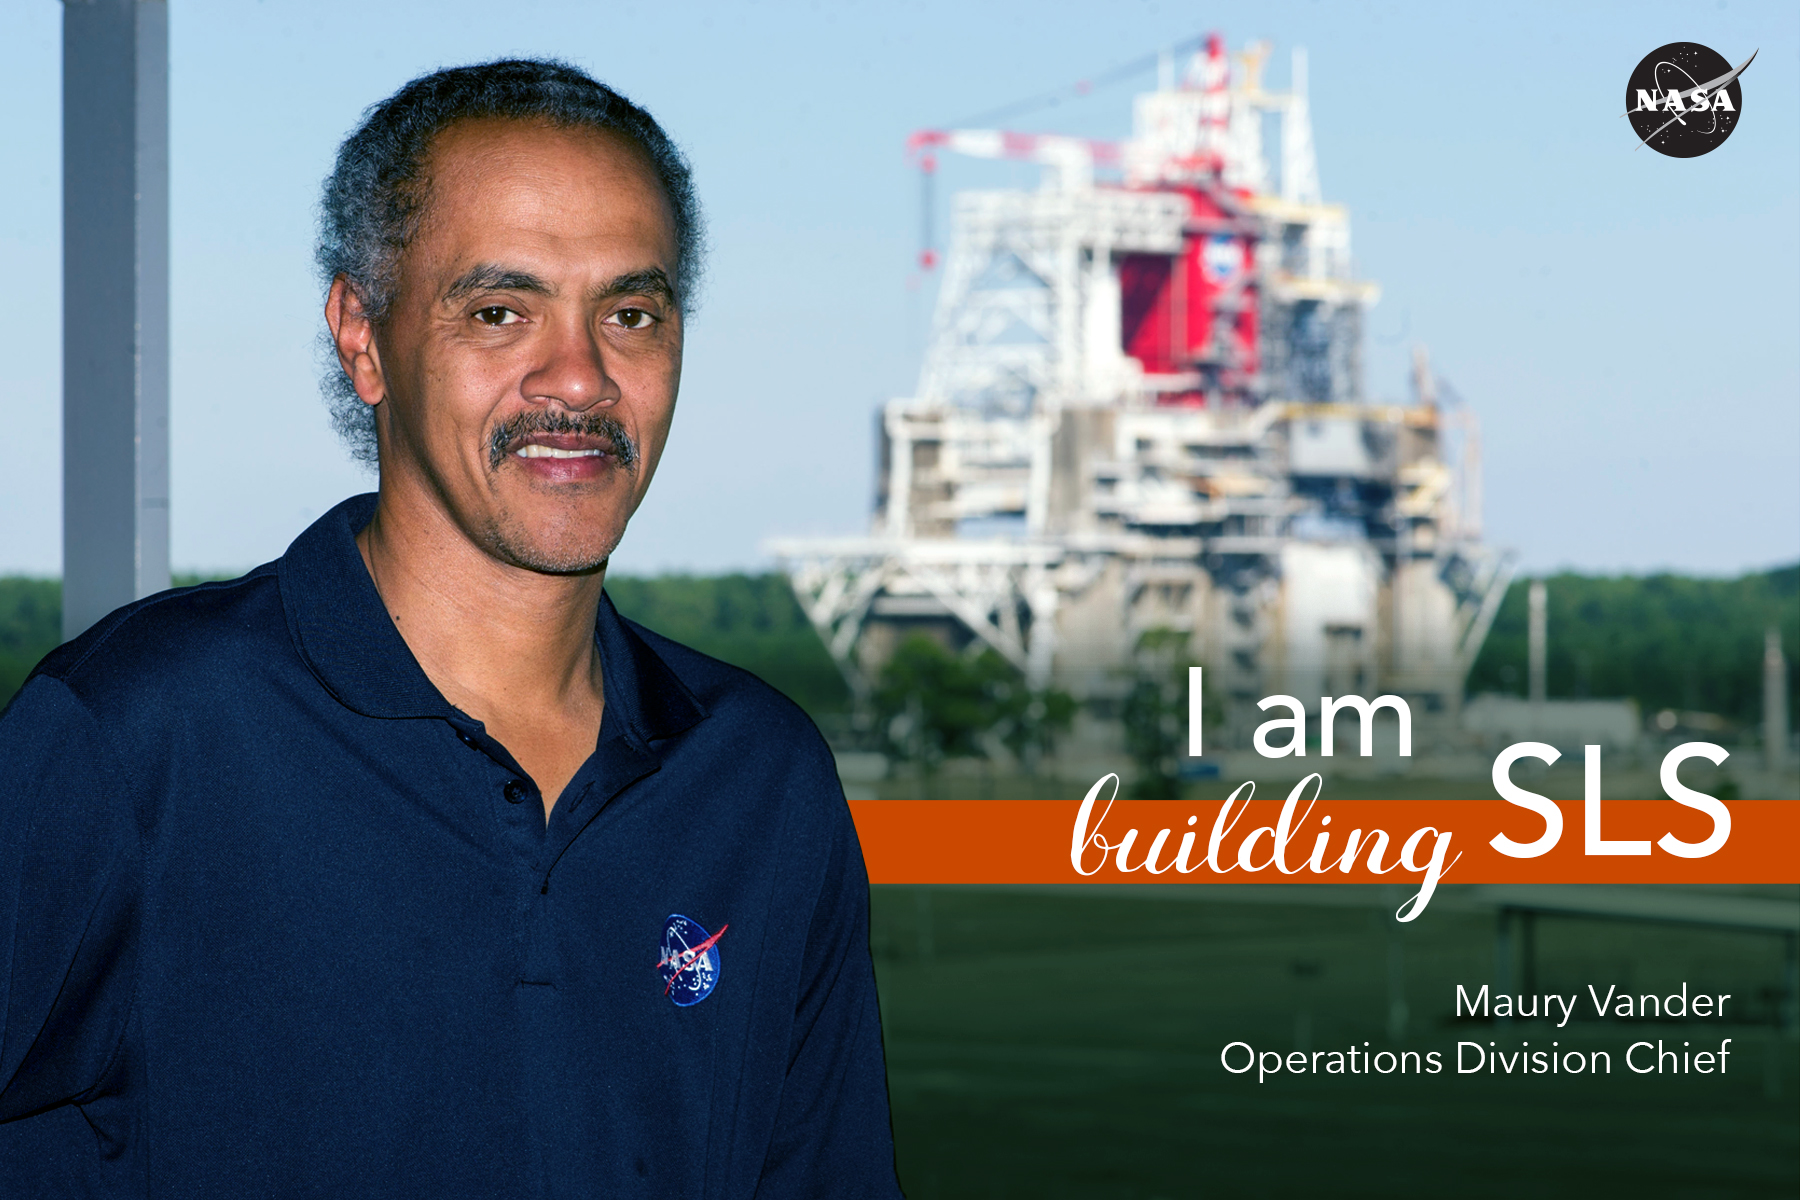 Maury Vander, chief of the Operations Division at NASA's Stennis Space Center